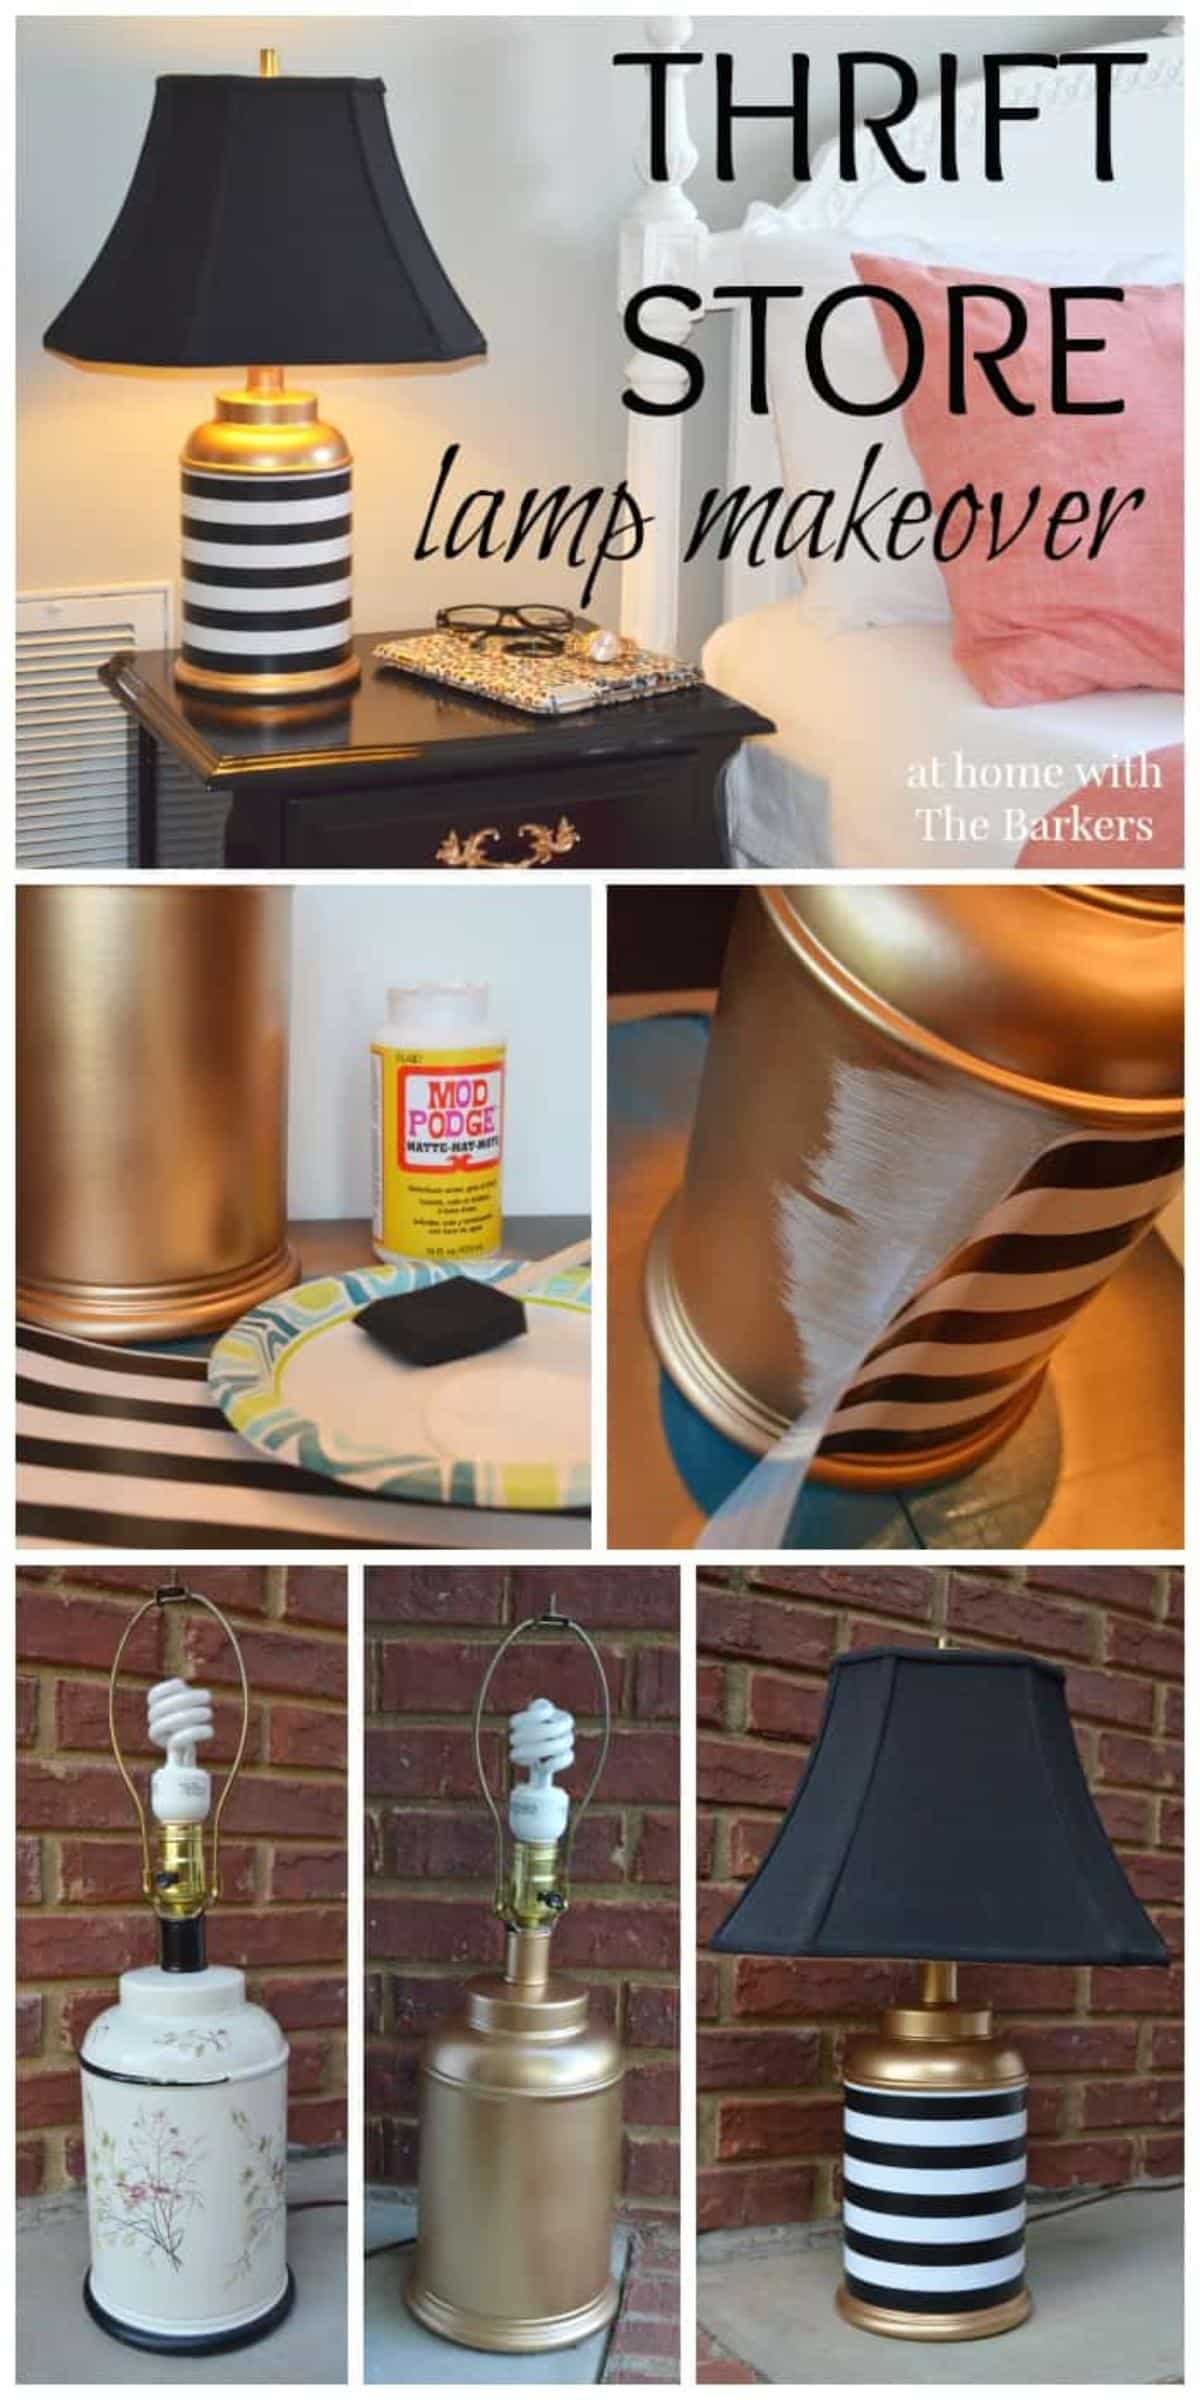 DIY Thrift Store Lamp Makeover collage.